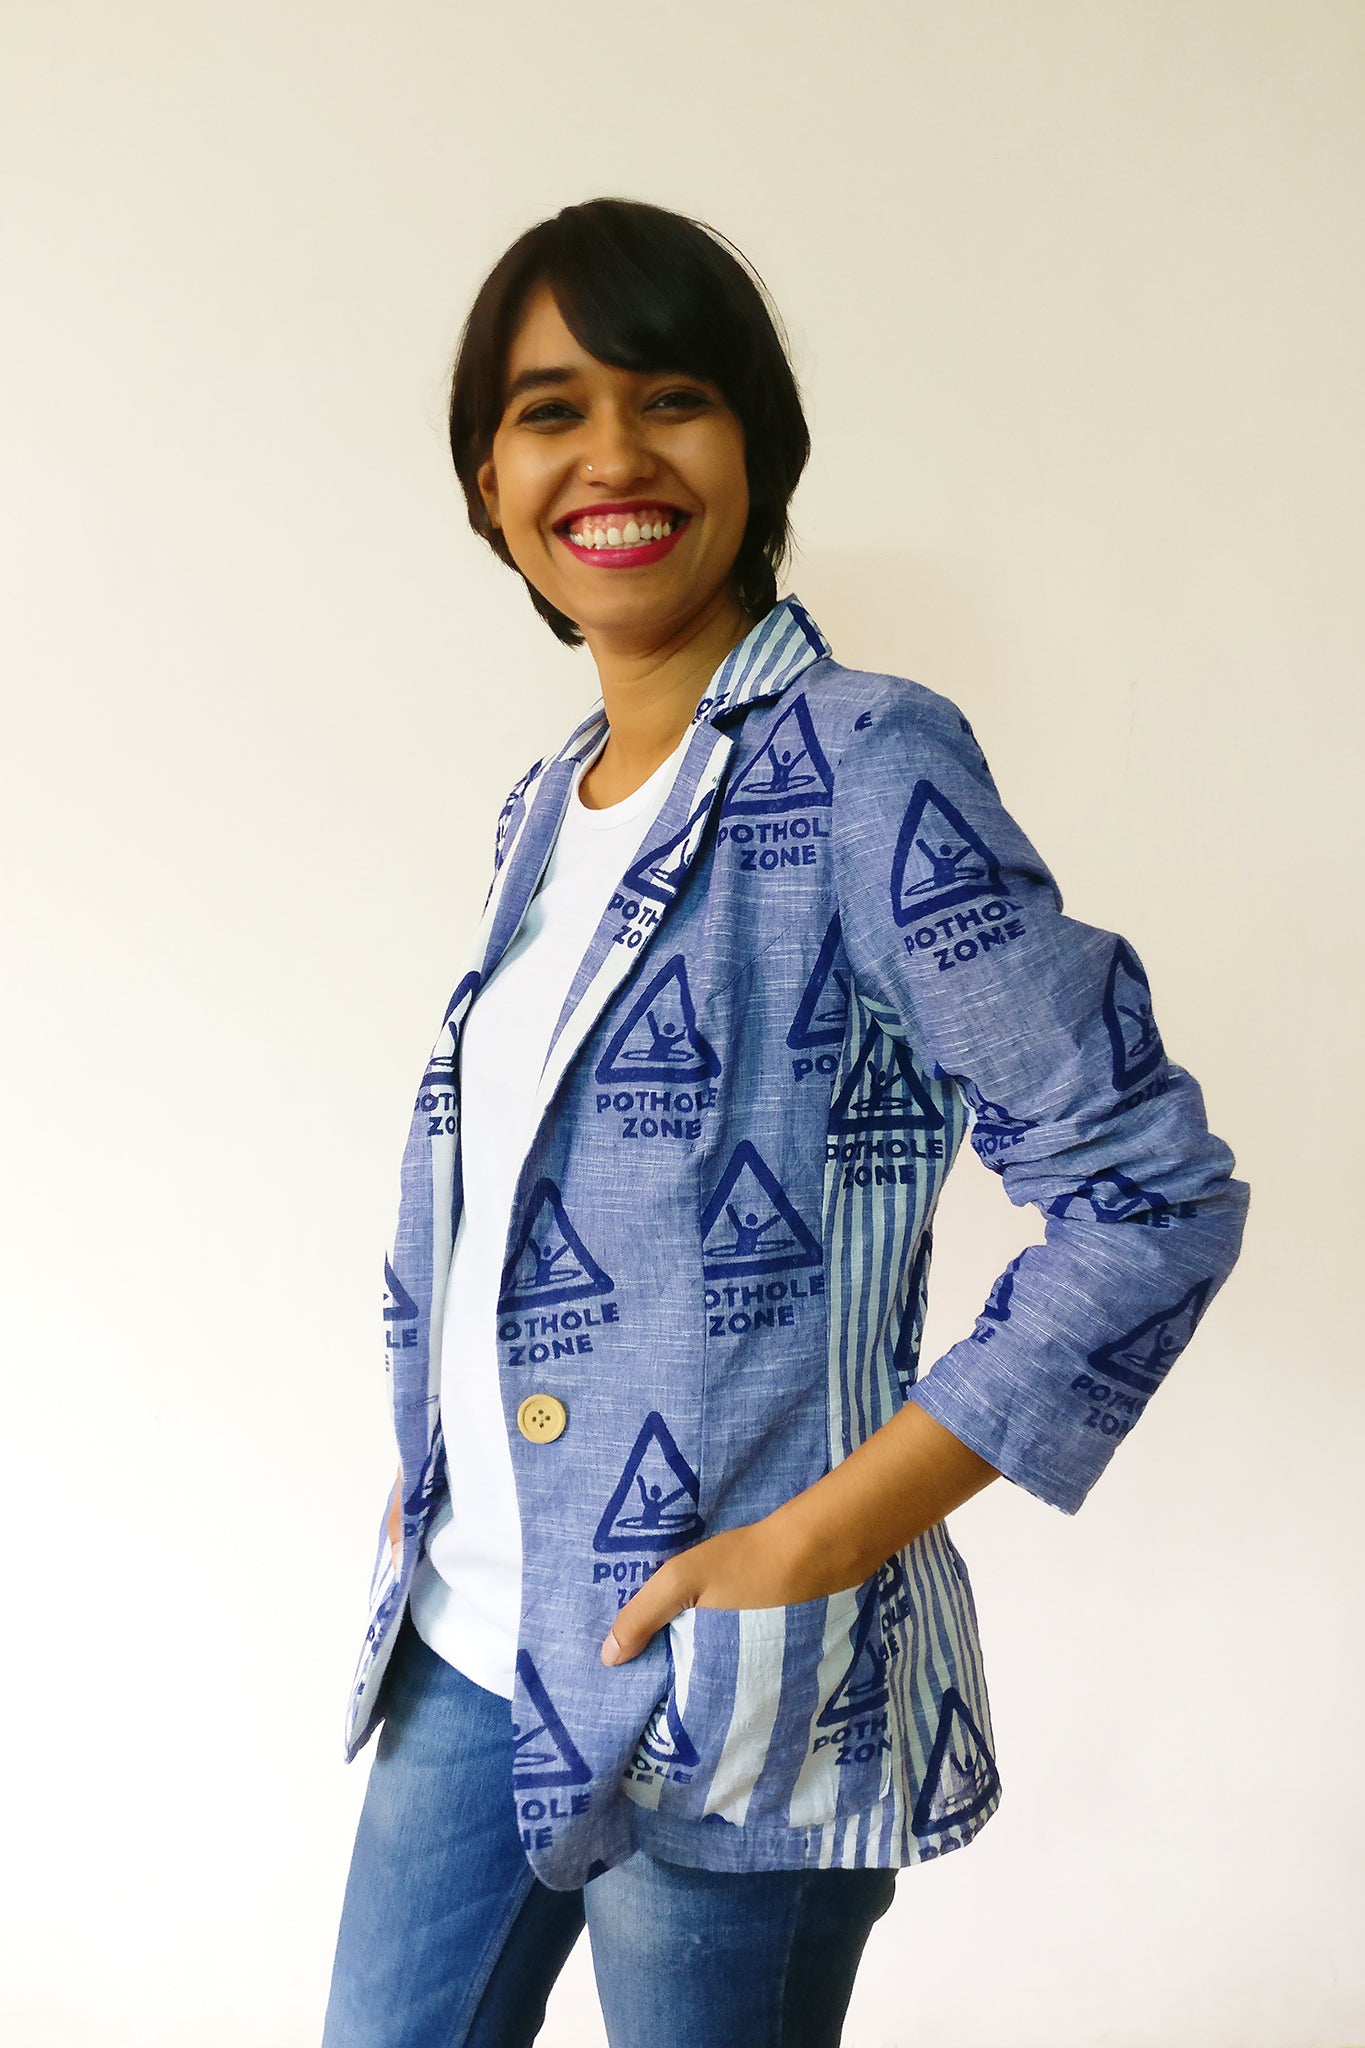 Wear your love for Bombay Meri Jaan. Women's Blazer Jacket with our original print Pothole Zone on very cool handloom stripe cotton fabric. Shop online and survive the monsoon!